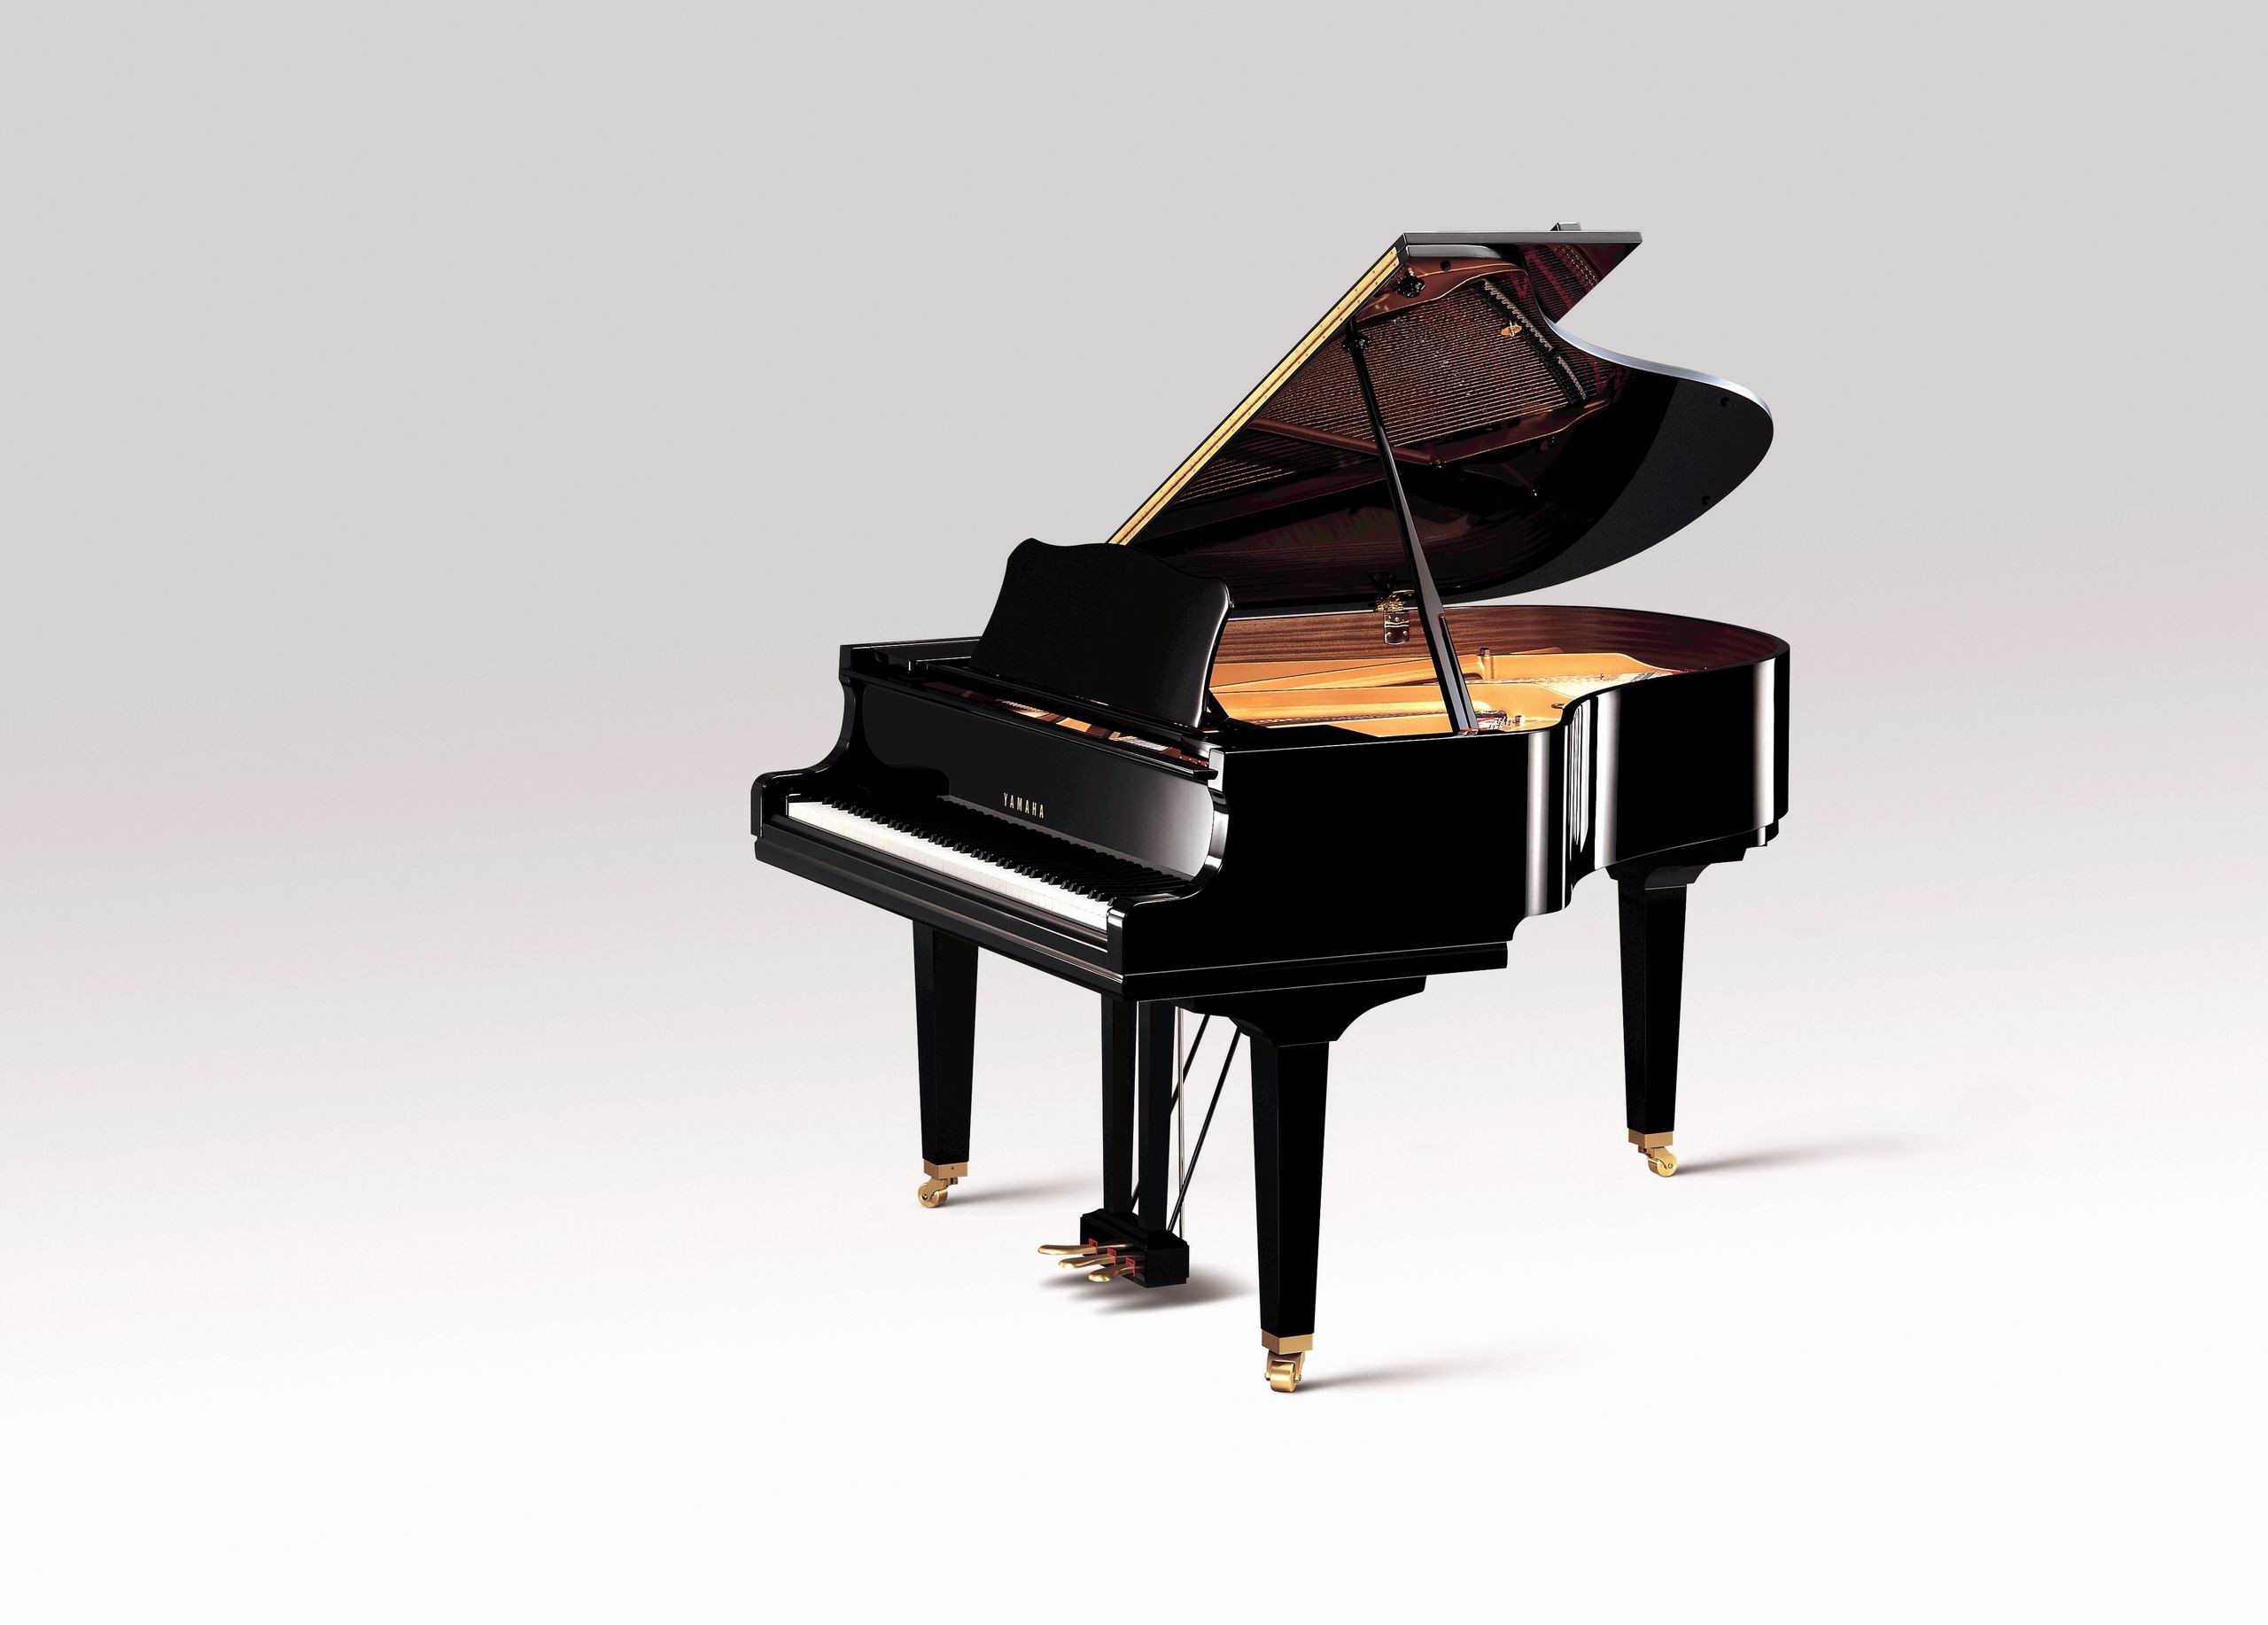 2560x1834 Piano HD Wallpaper - HD Wallpapers Backgrounds of Your Choice